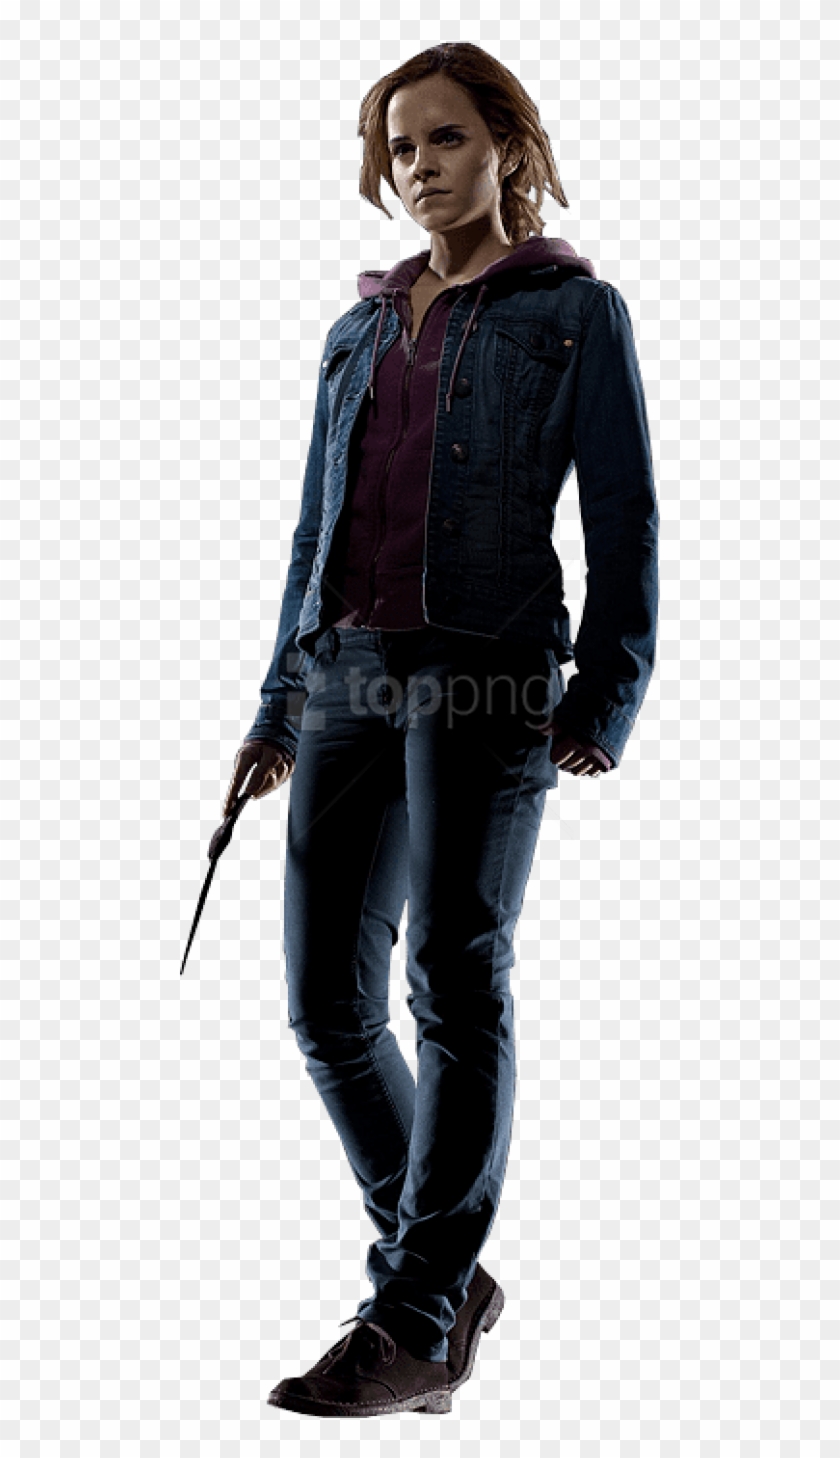 Free Png Hermione Harry Potter Png Harry Potter Hermione Png Transparent Png 480x1427 Pngfind